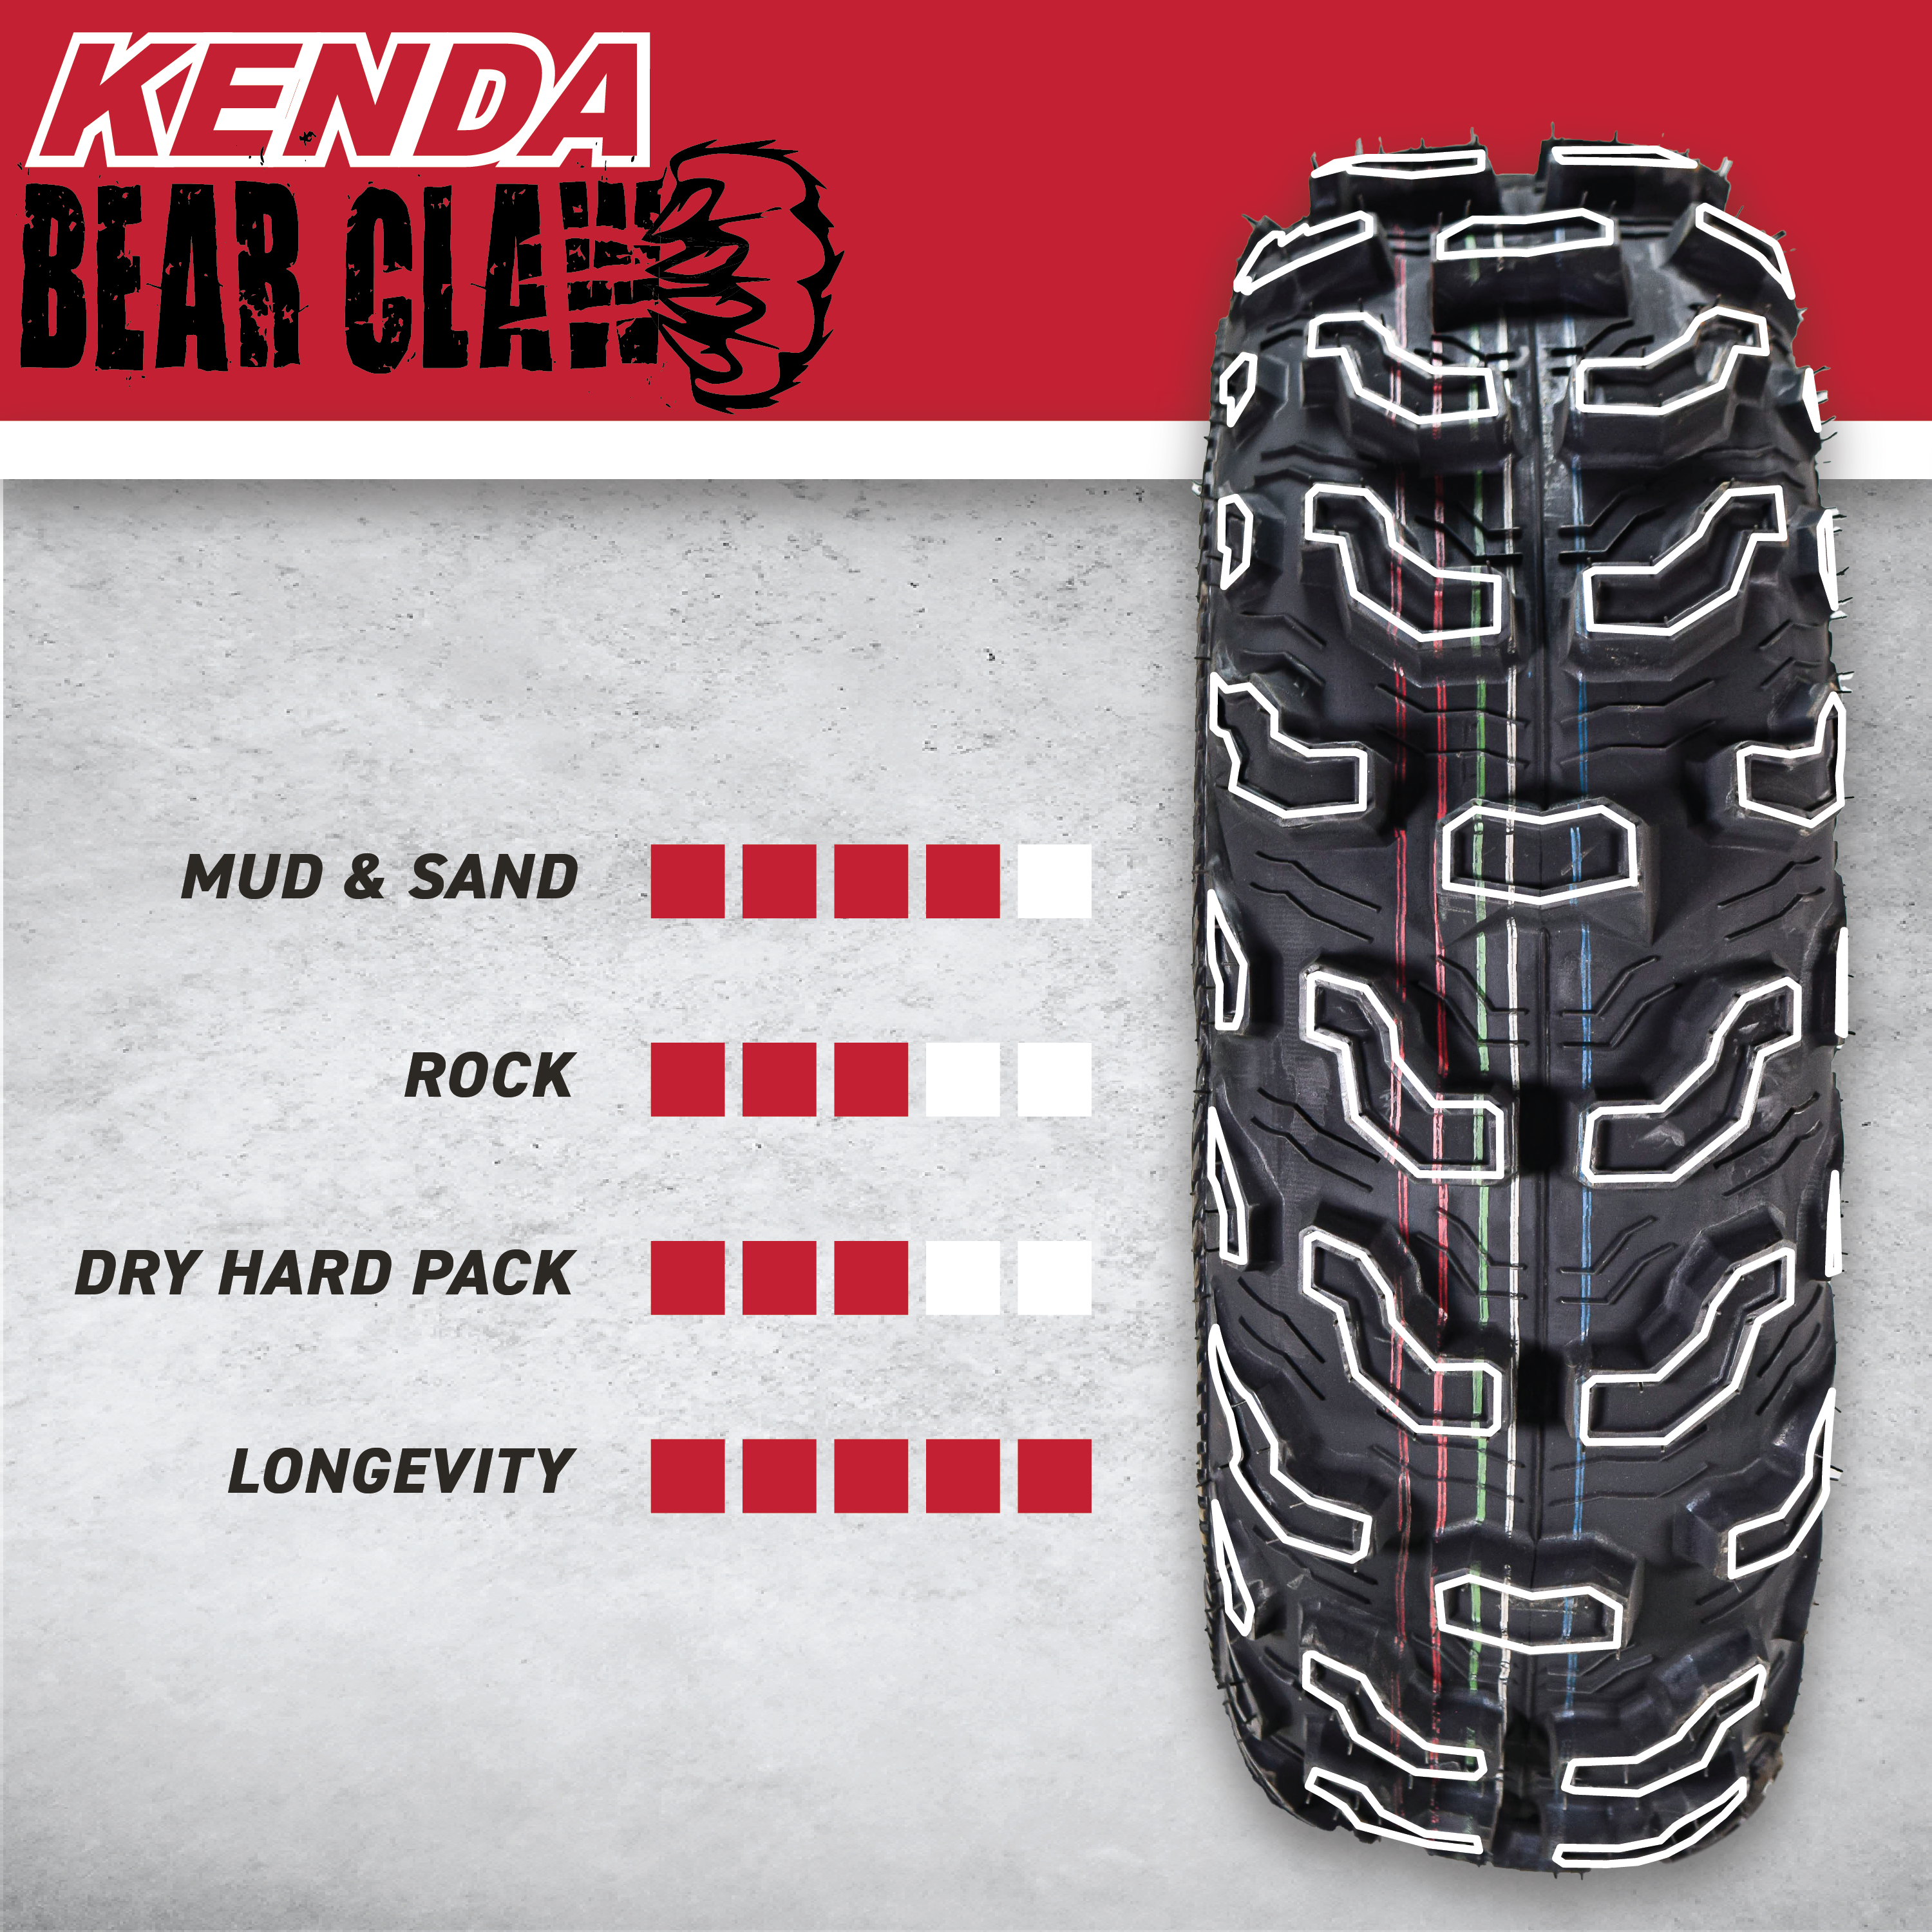 Kenda Bear Claw EX 26x10-12 Front ATV 6 PLY Tires Bearclaw 26x10x12 (4 Pack)